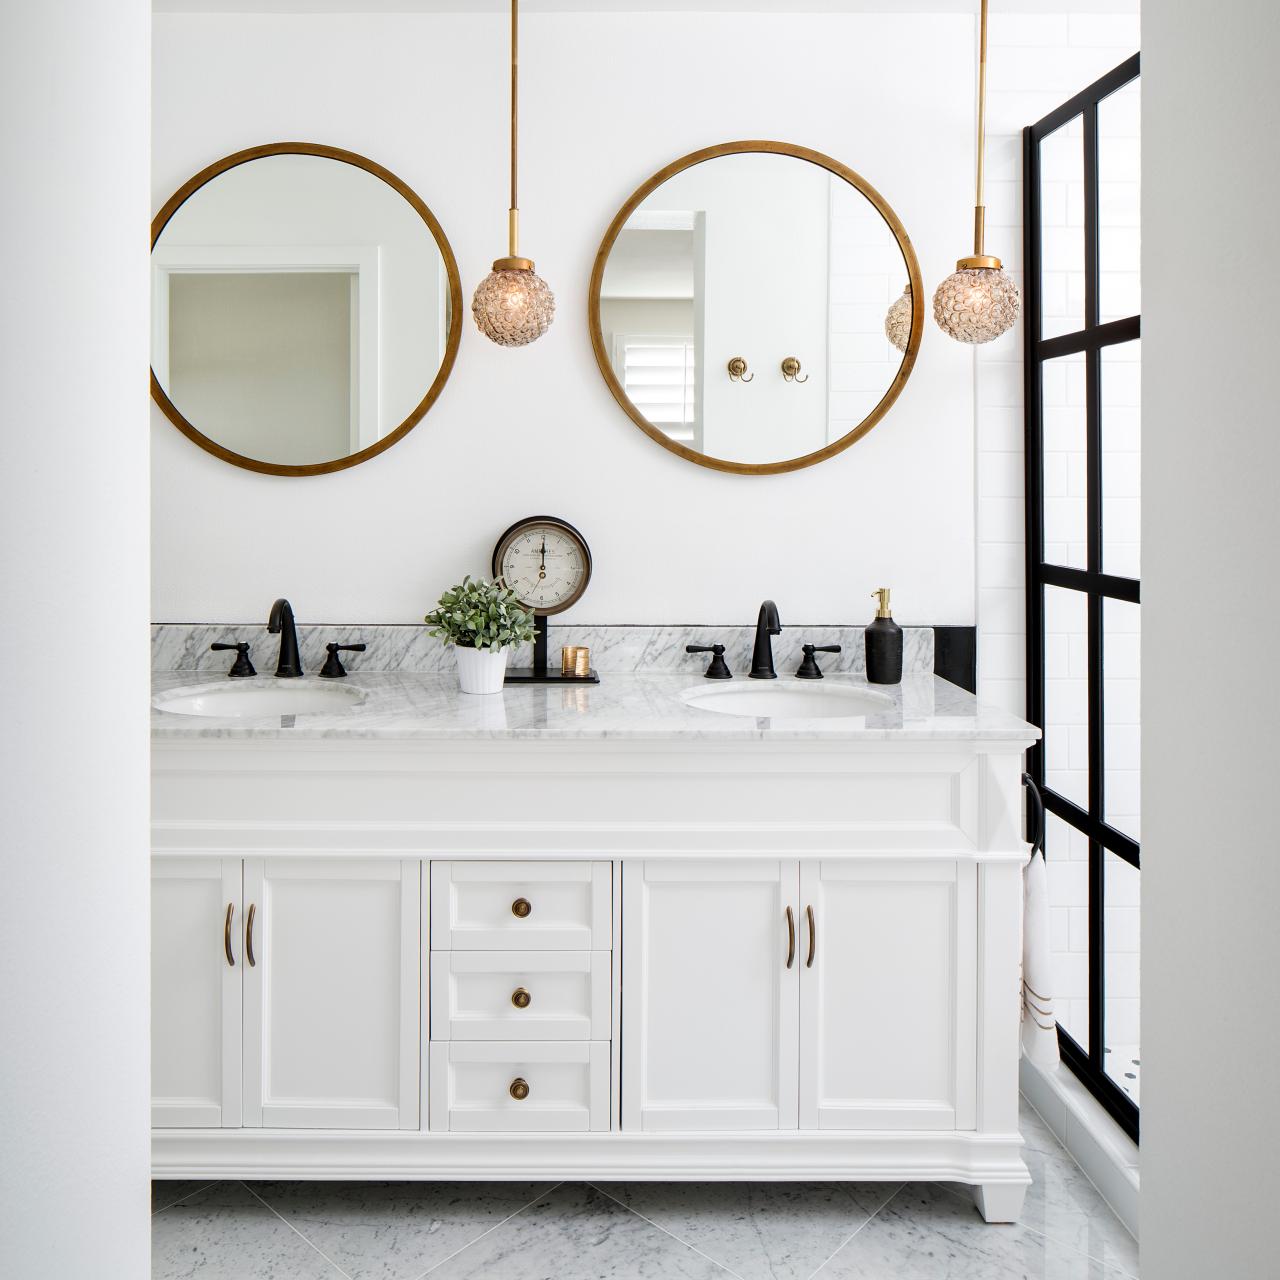 10 Powder Room Mirrors Ideas For Your, How Wide Should Mirror Be Over Double Vanity